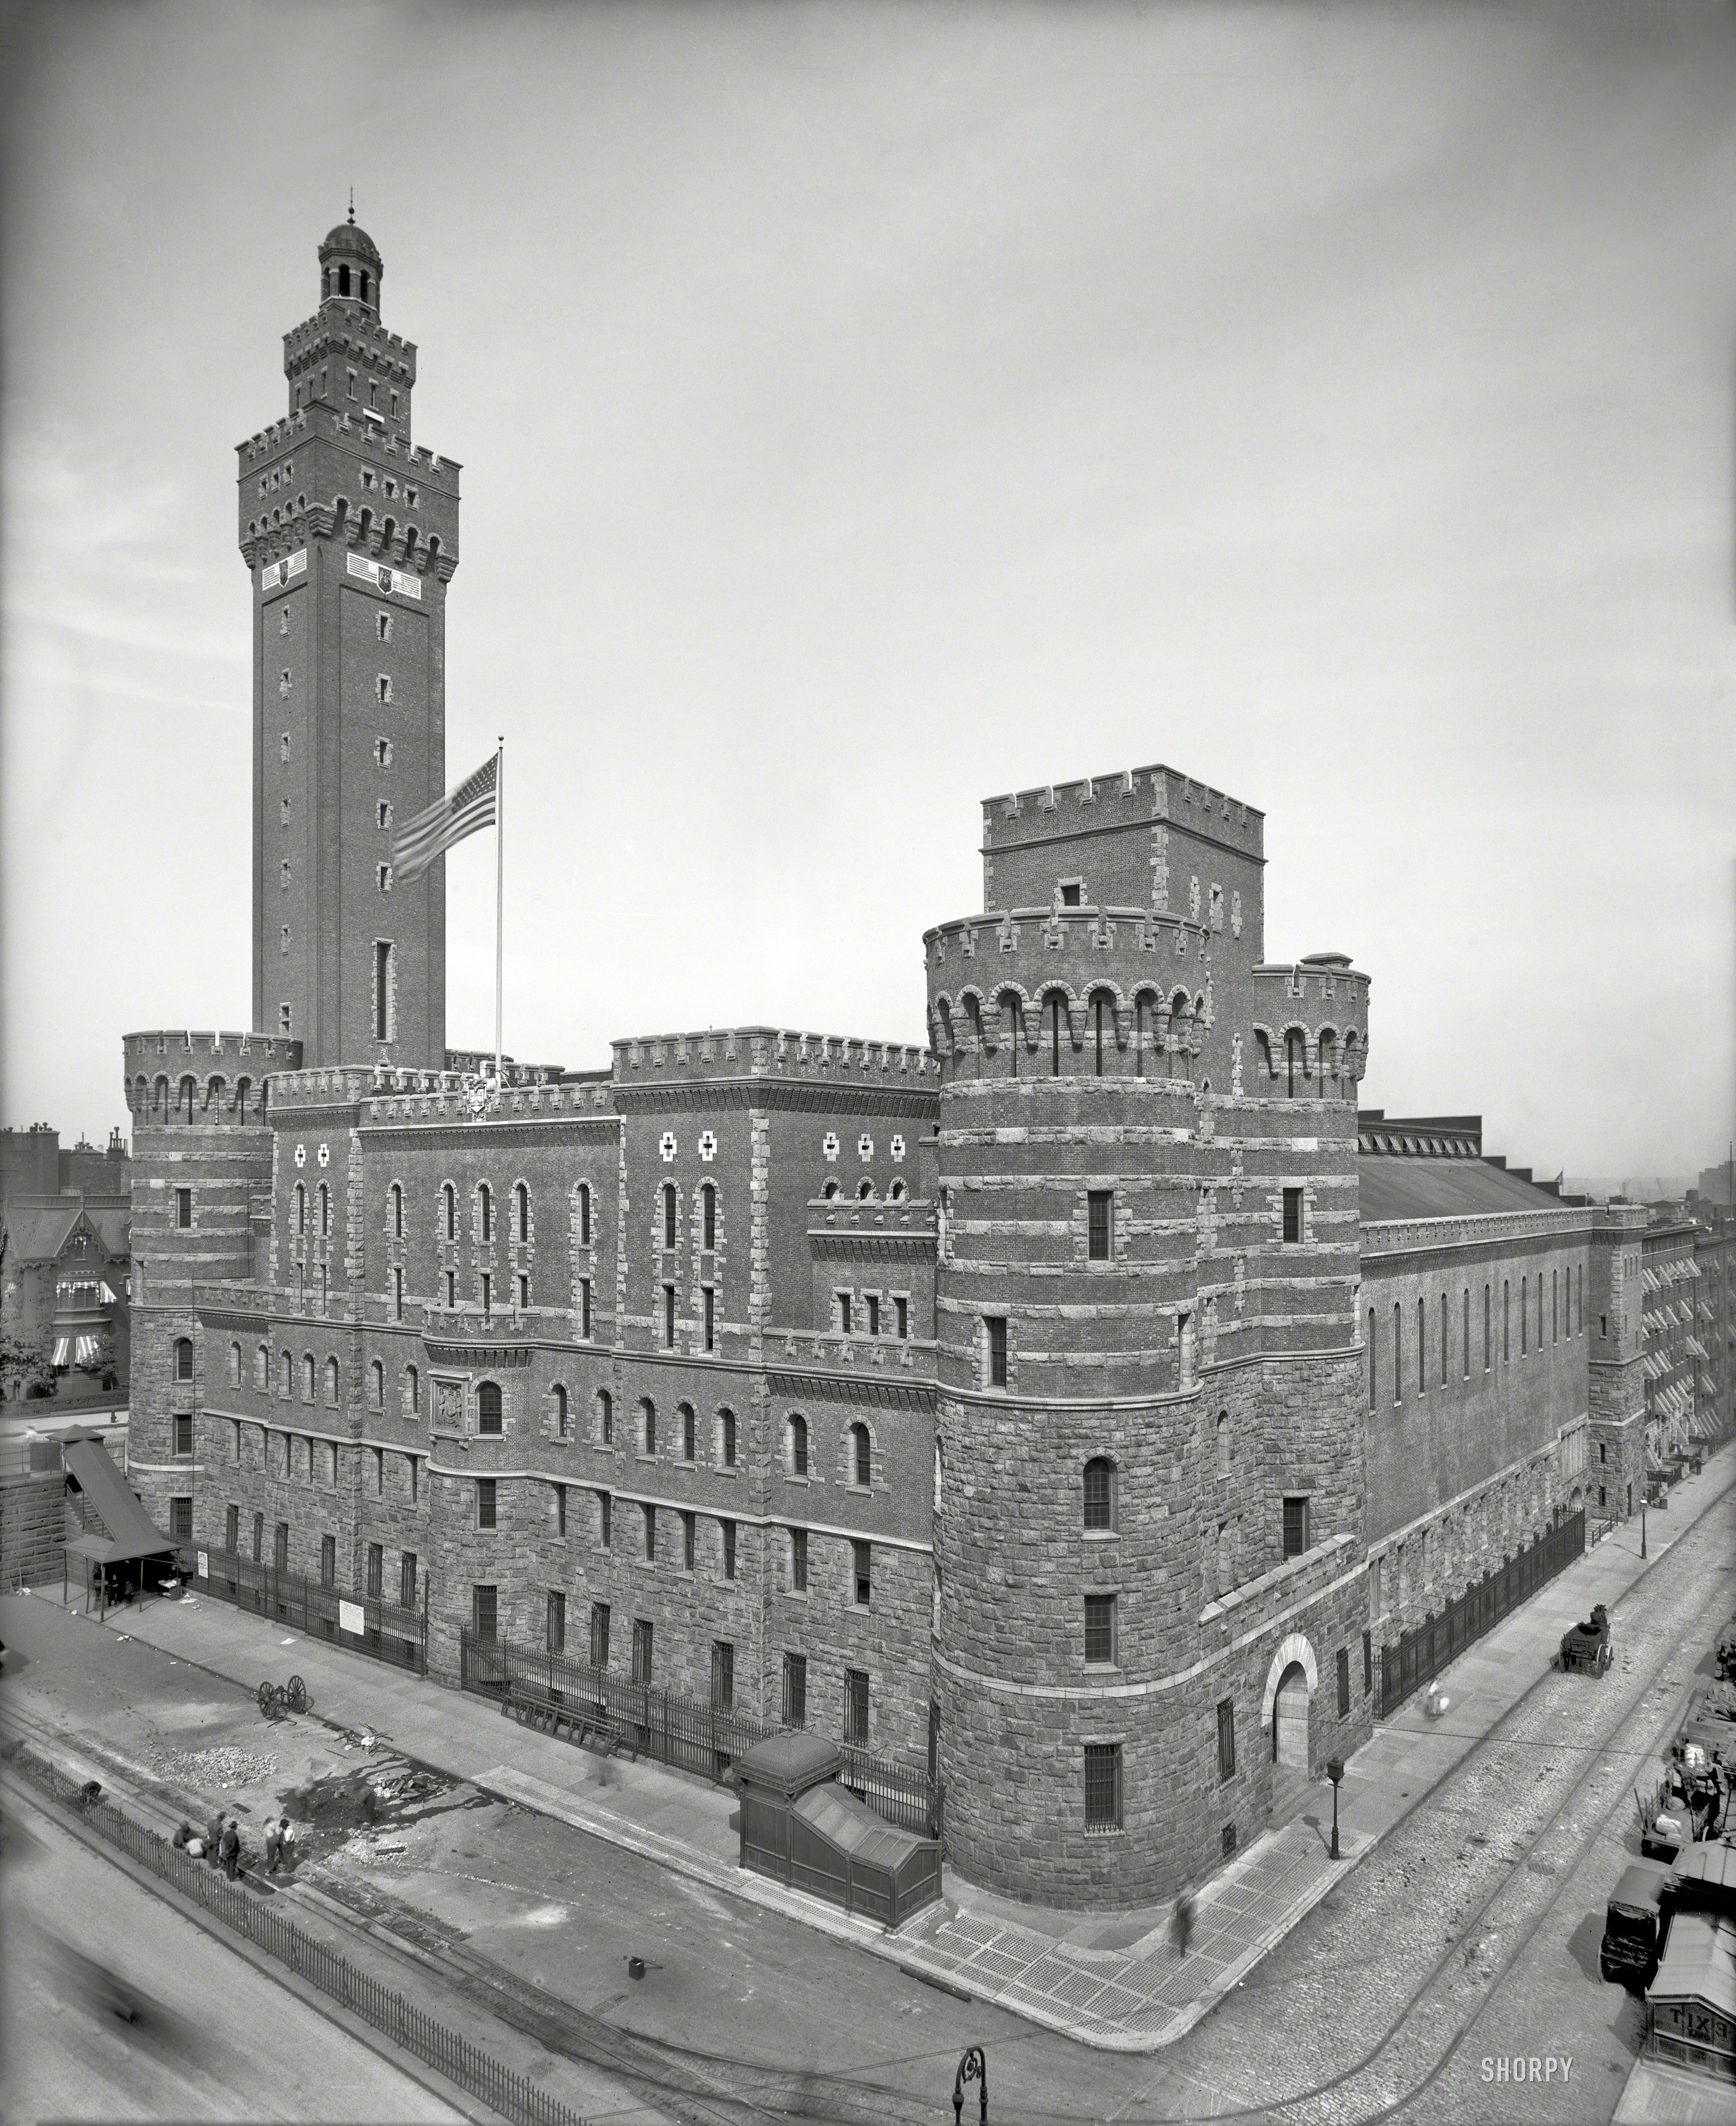 New York circa 1906. "Seventy-First Regiment Armory, Park Avenue." 8x10 inch dry plate glass negative, Detroit Publishing Company. View full size.